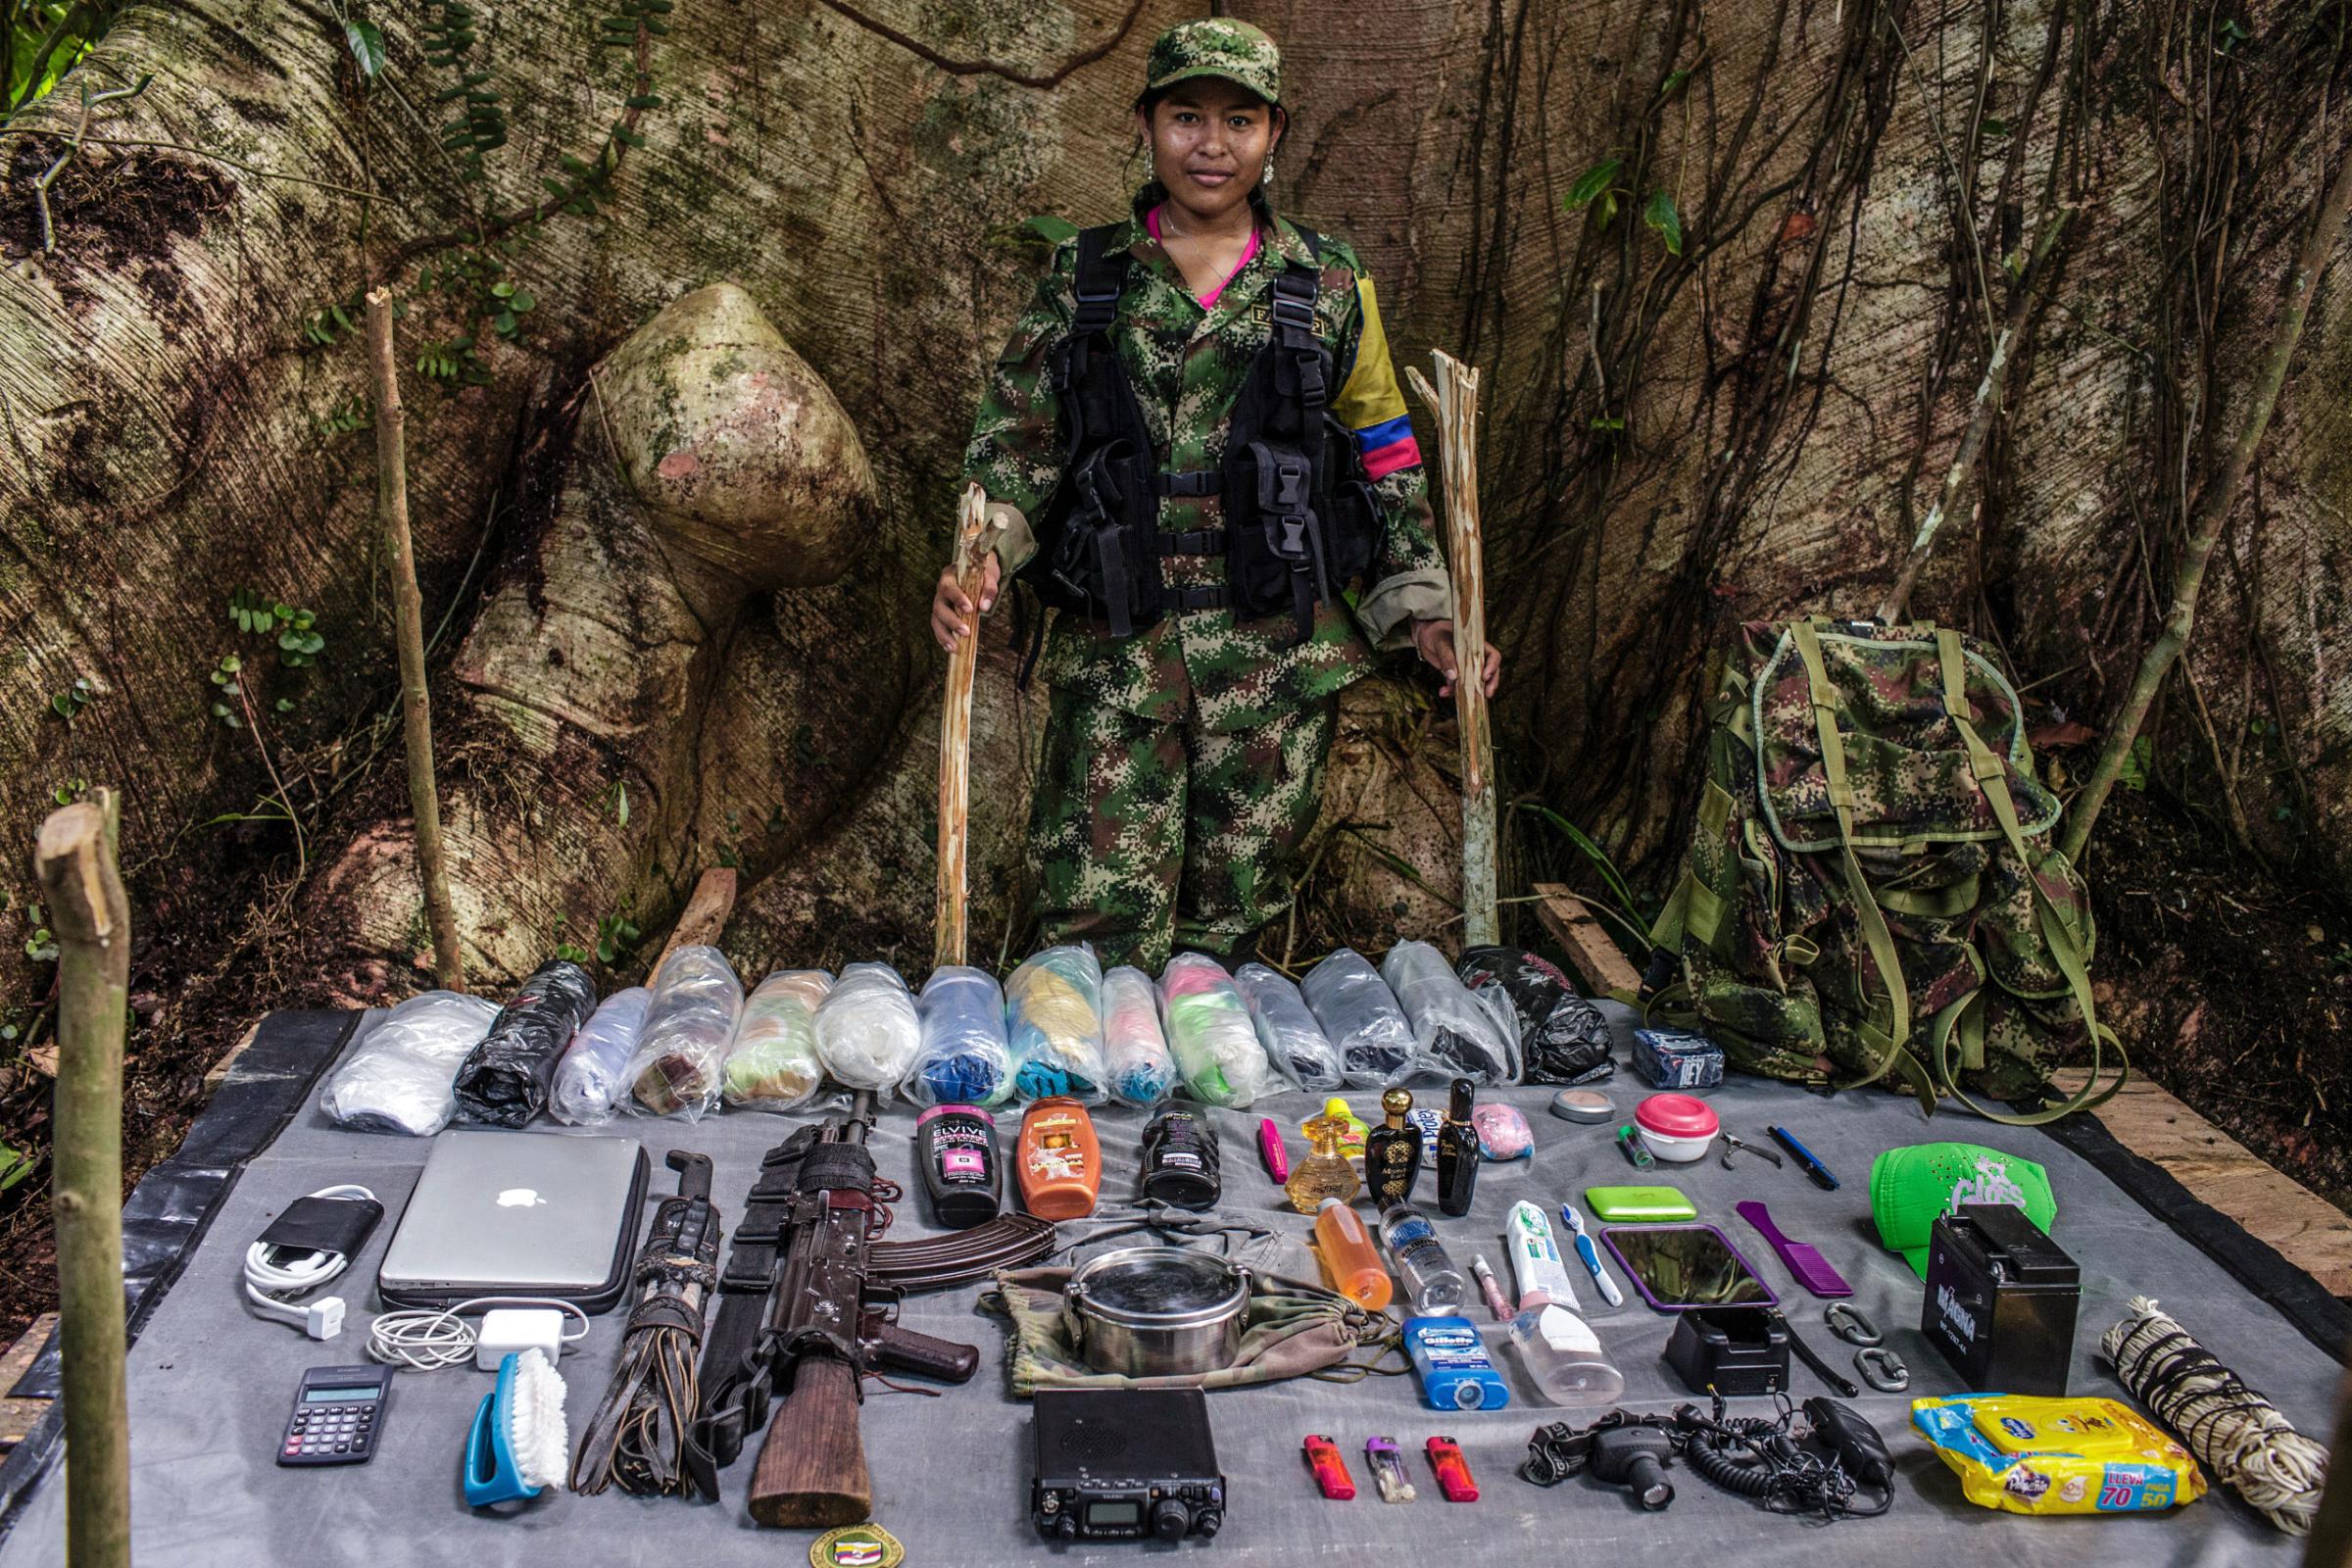 "Marcela", 18-years old, has been with FARC for two years. She is from an indigenous community that was attacked by a paramilitaries, and afterward she jointed FARC. As a radio operator, she carries a lot of gear for the group, including a laptop, radio, and batteries.